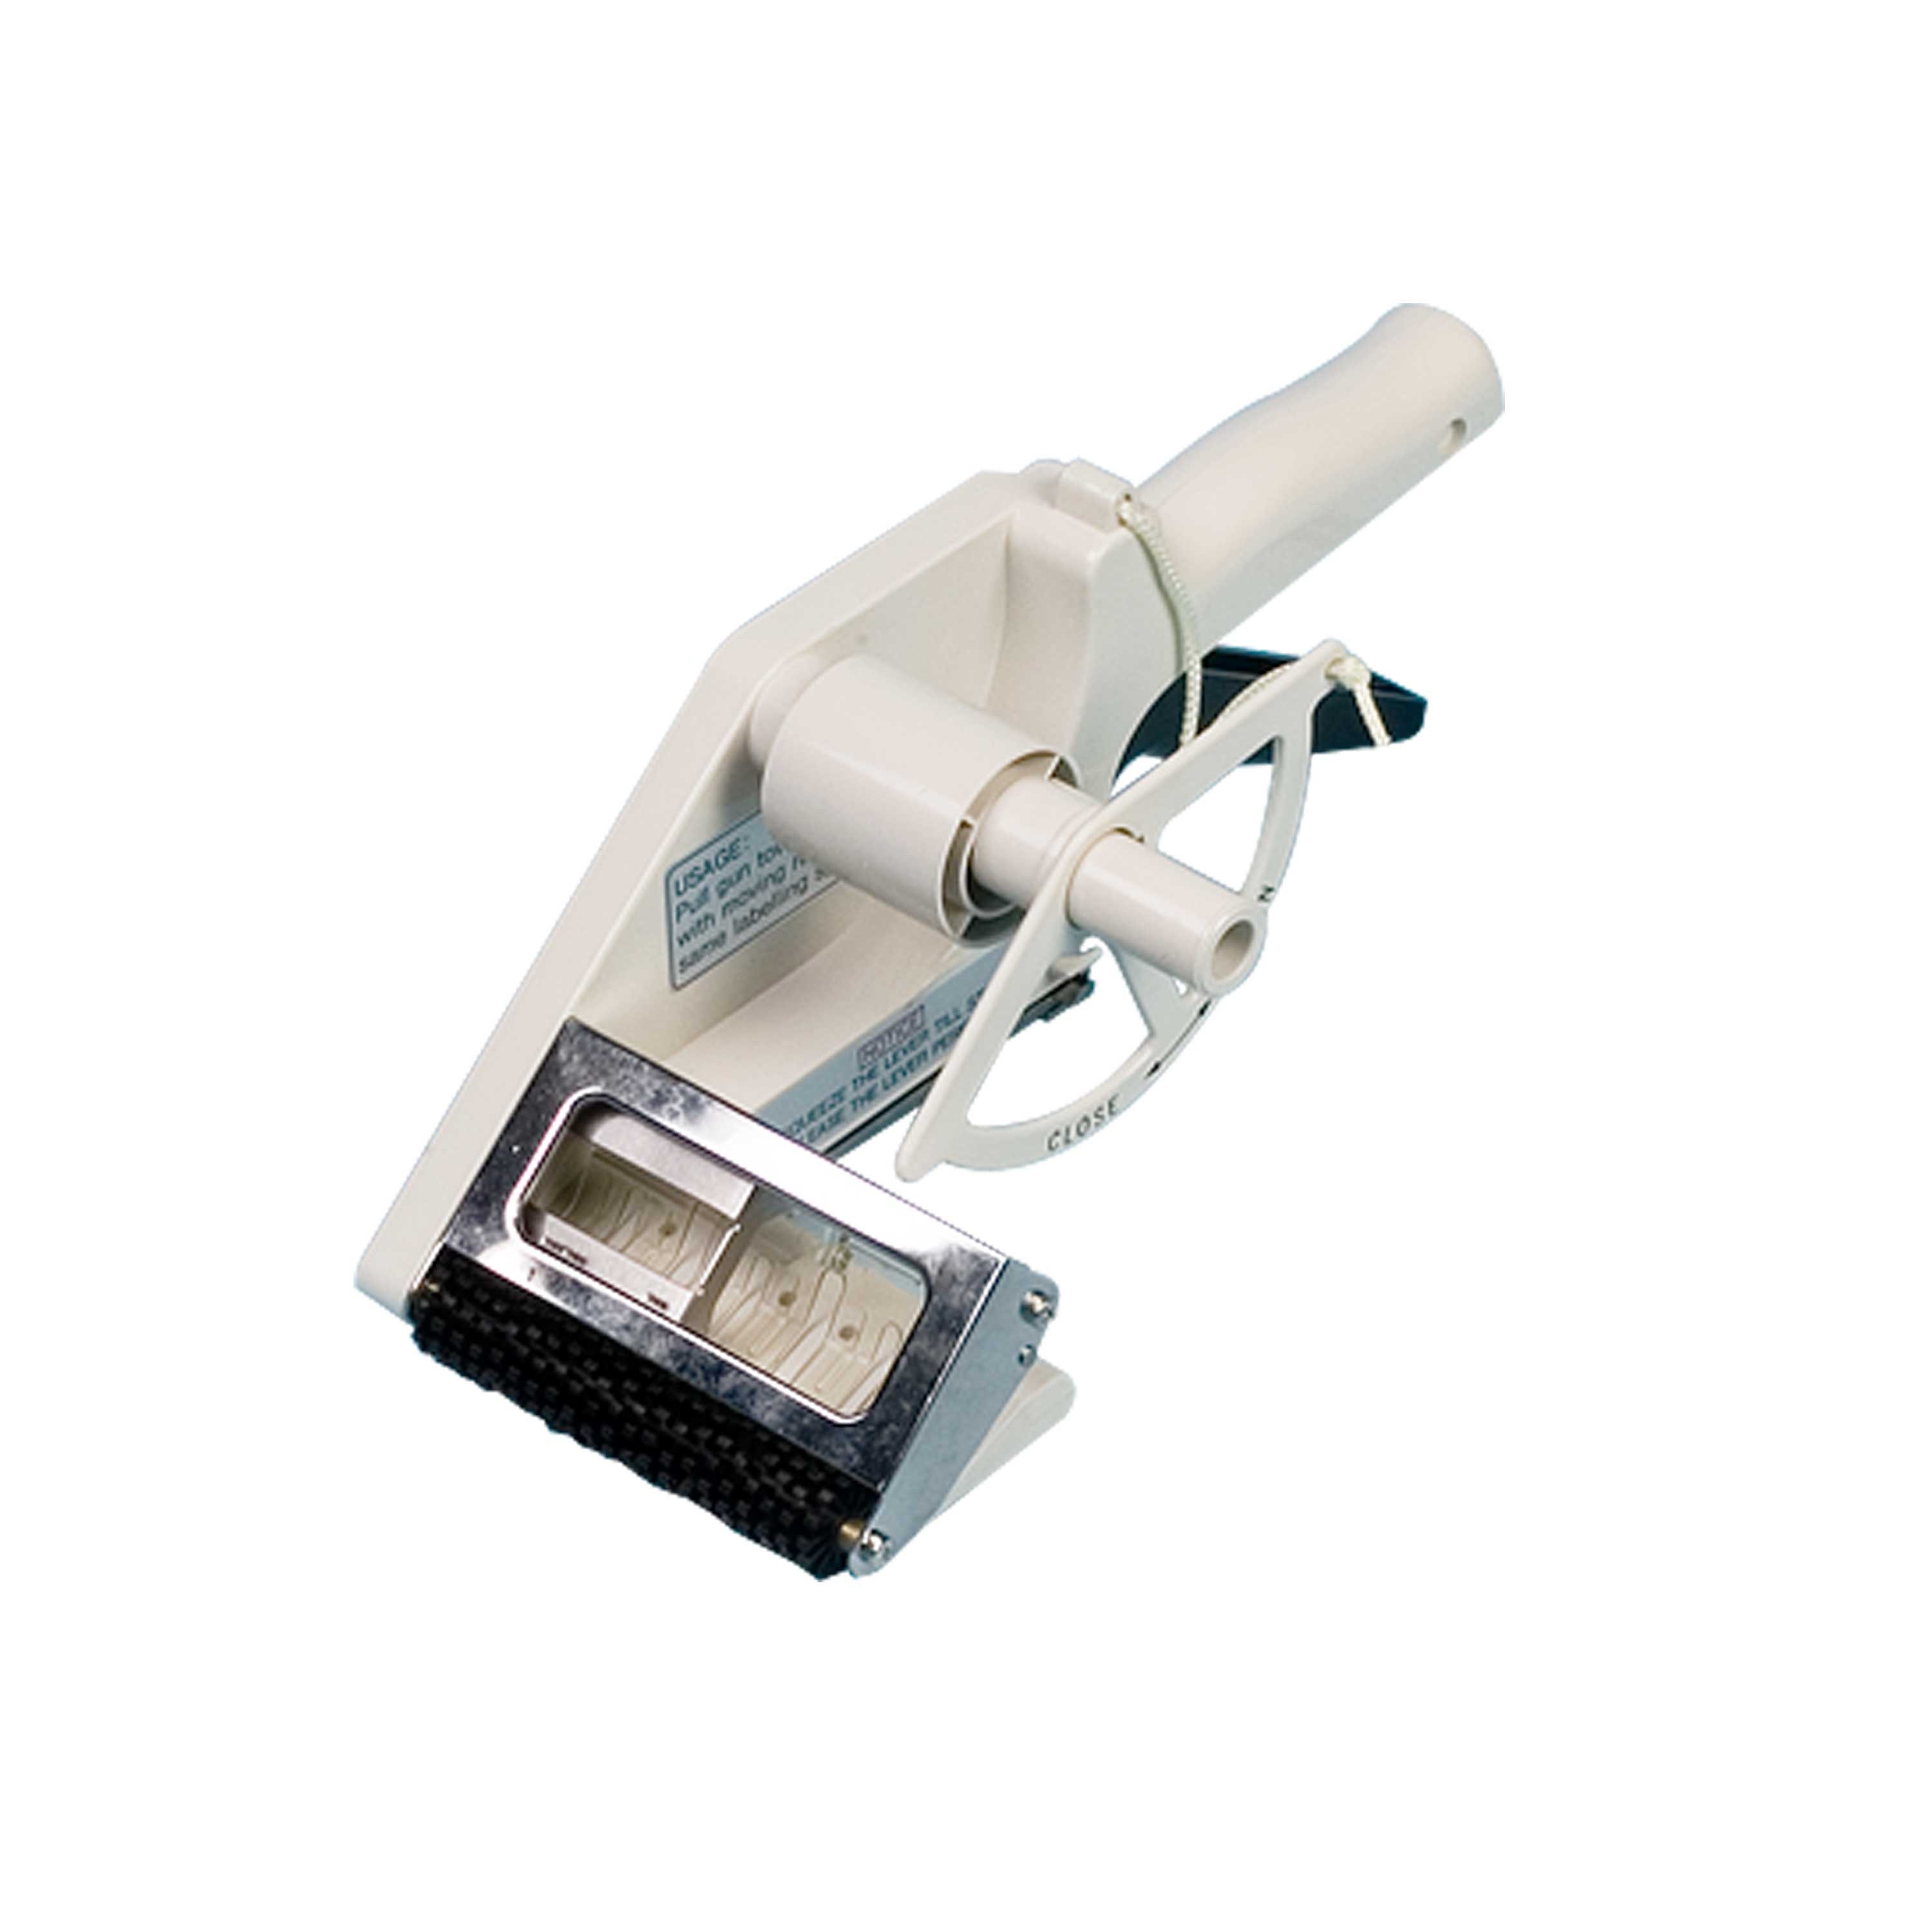 AP65-30 - Hand-Held Label Applicator Machine (Up to 1.2 inch wide